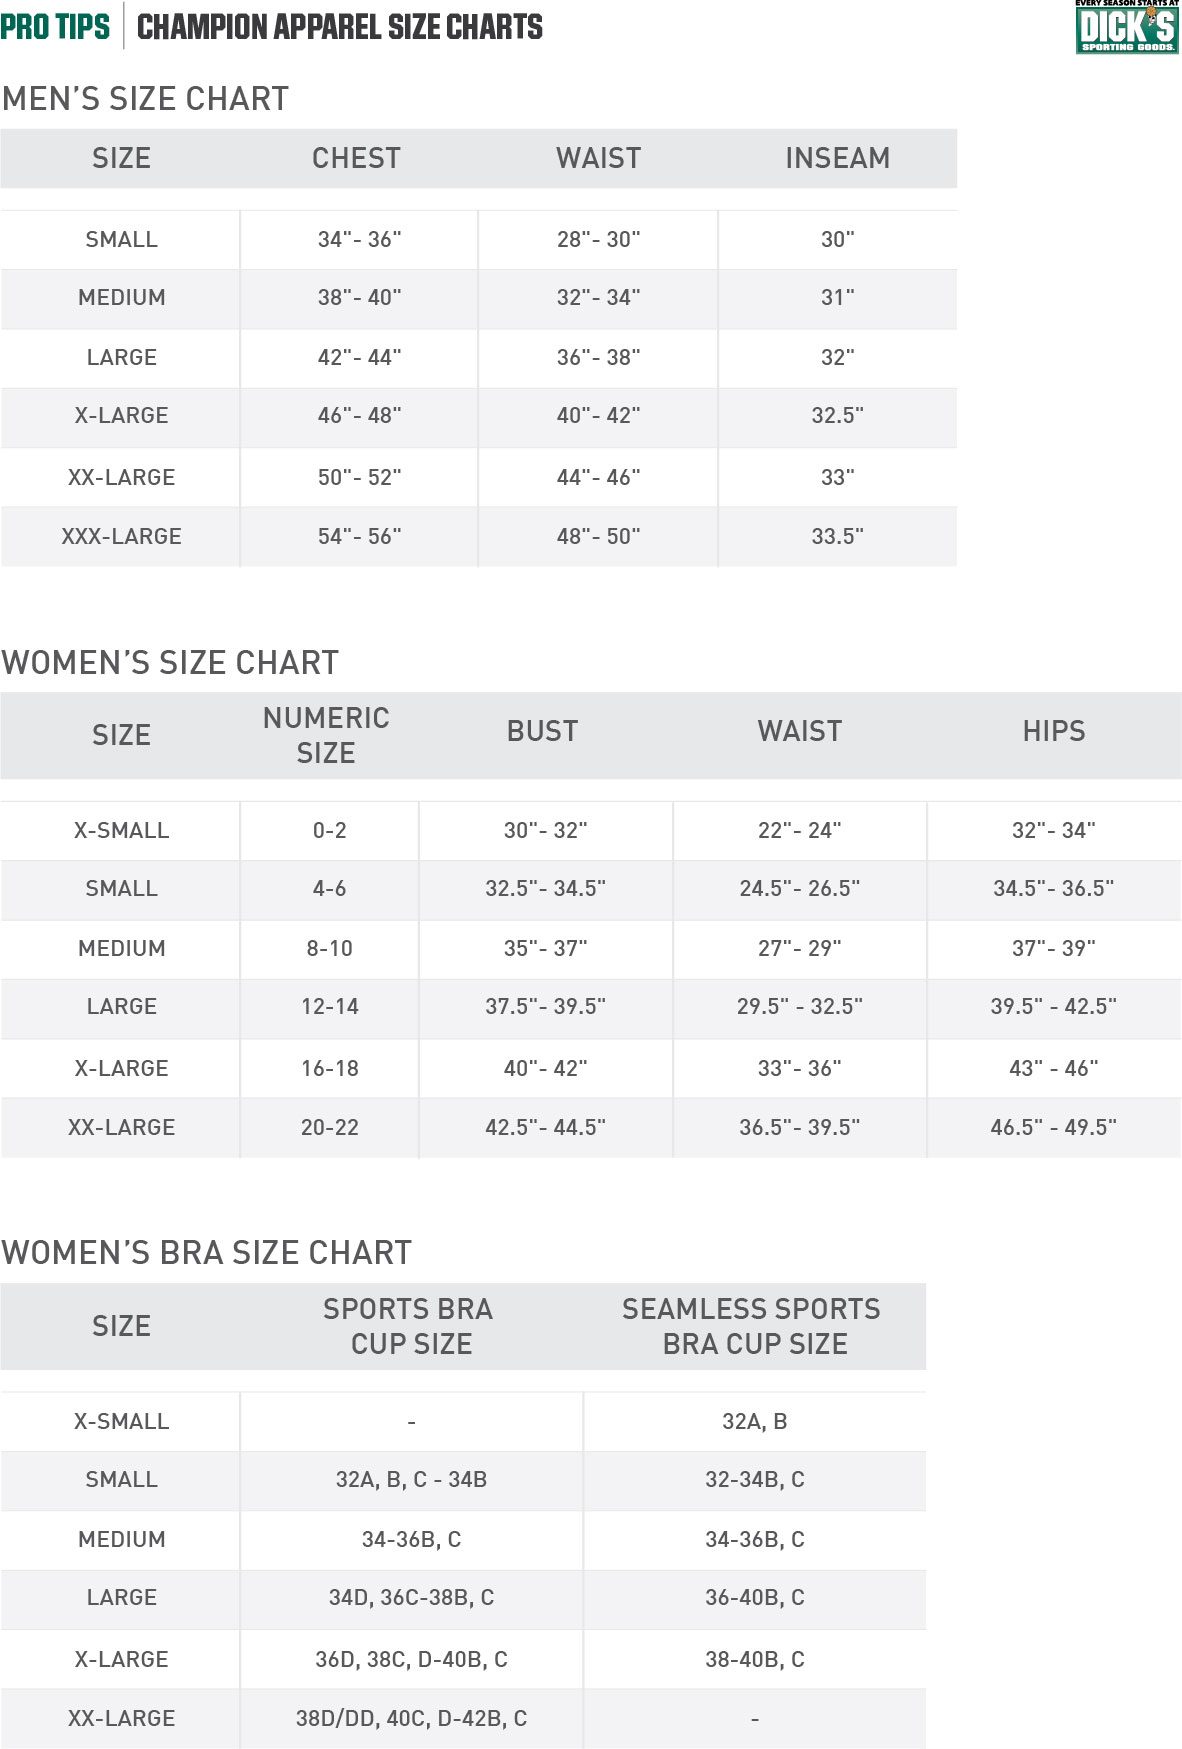 Dick sporting goods size chart